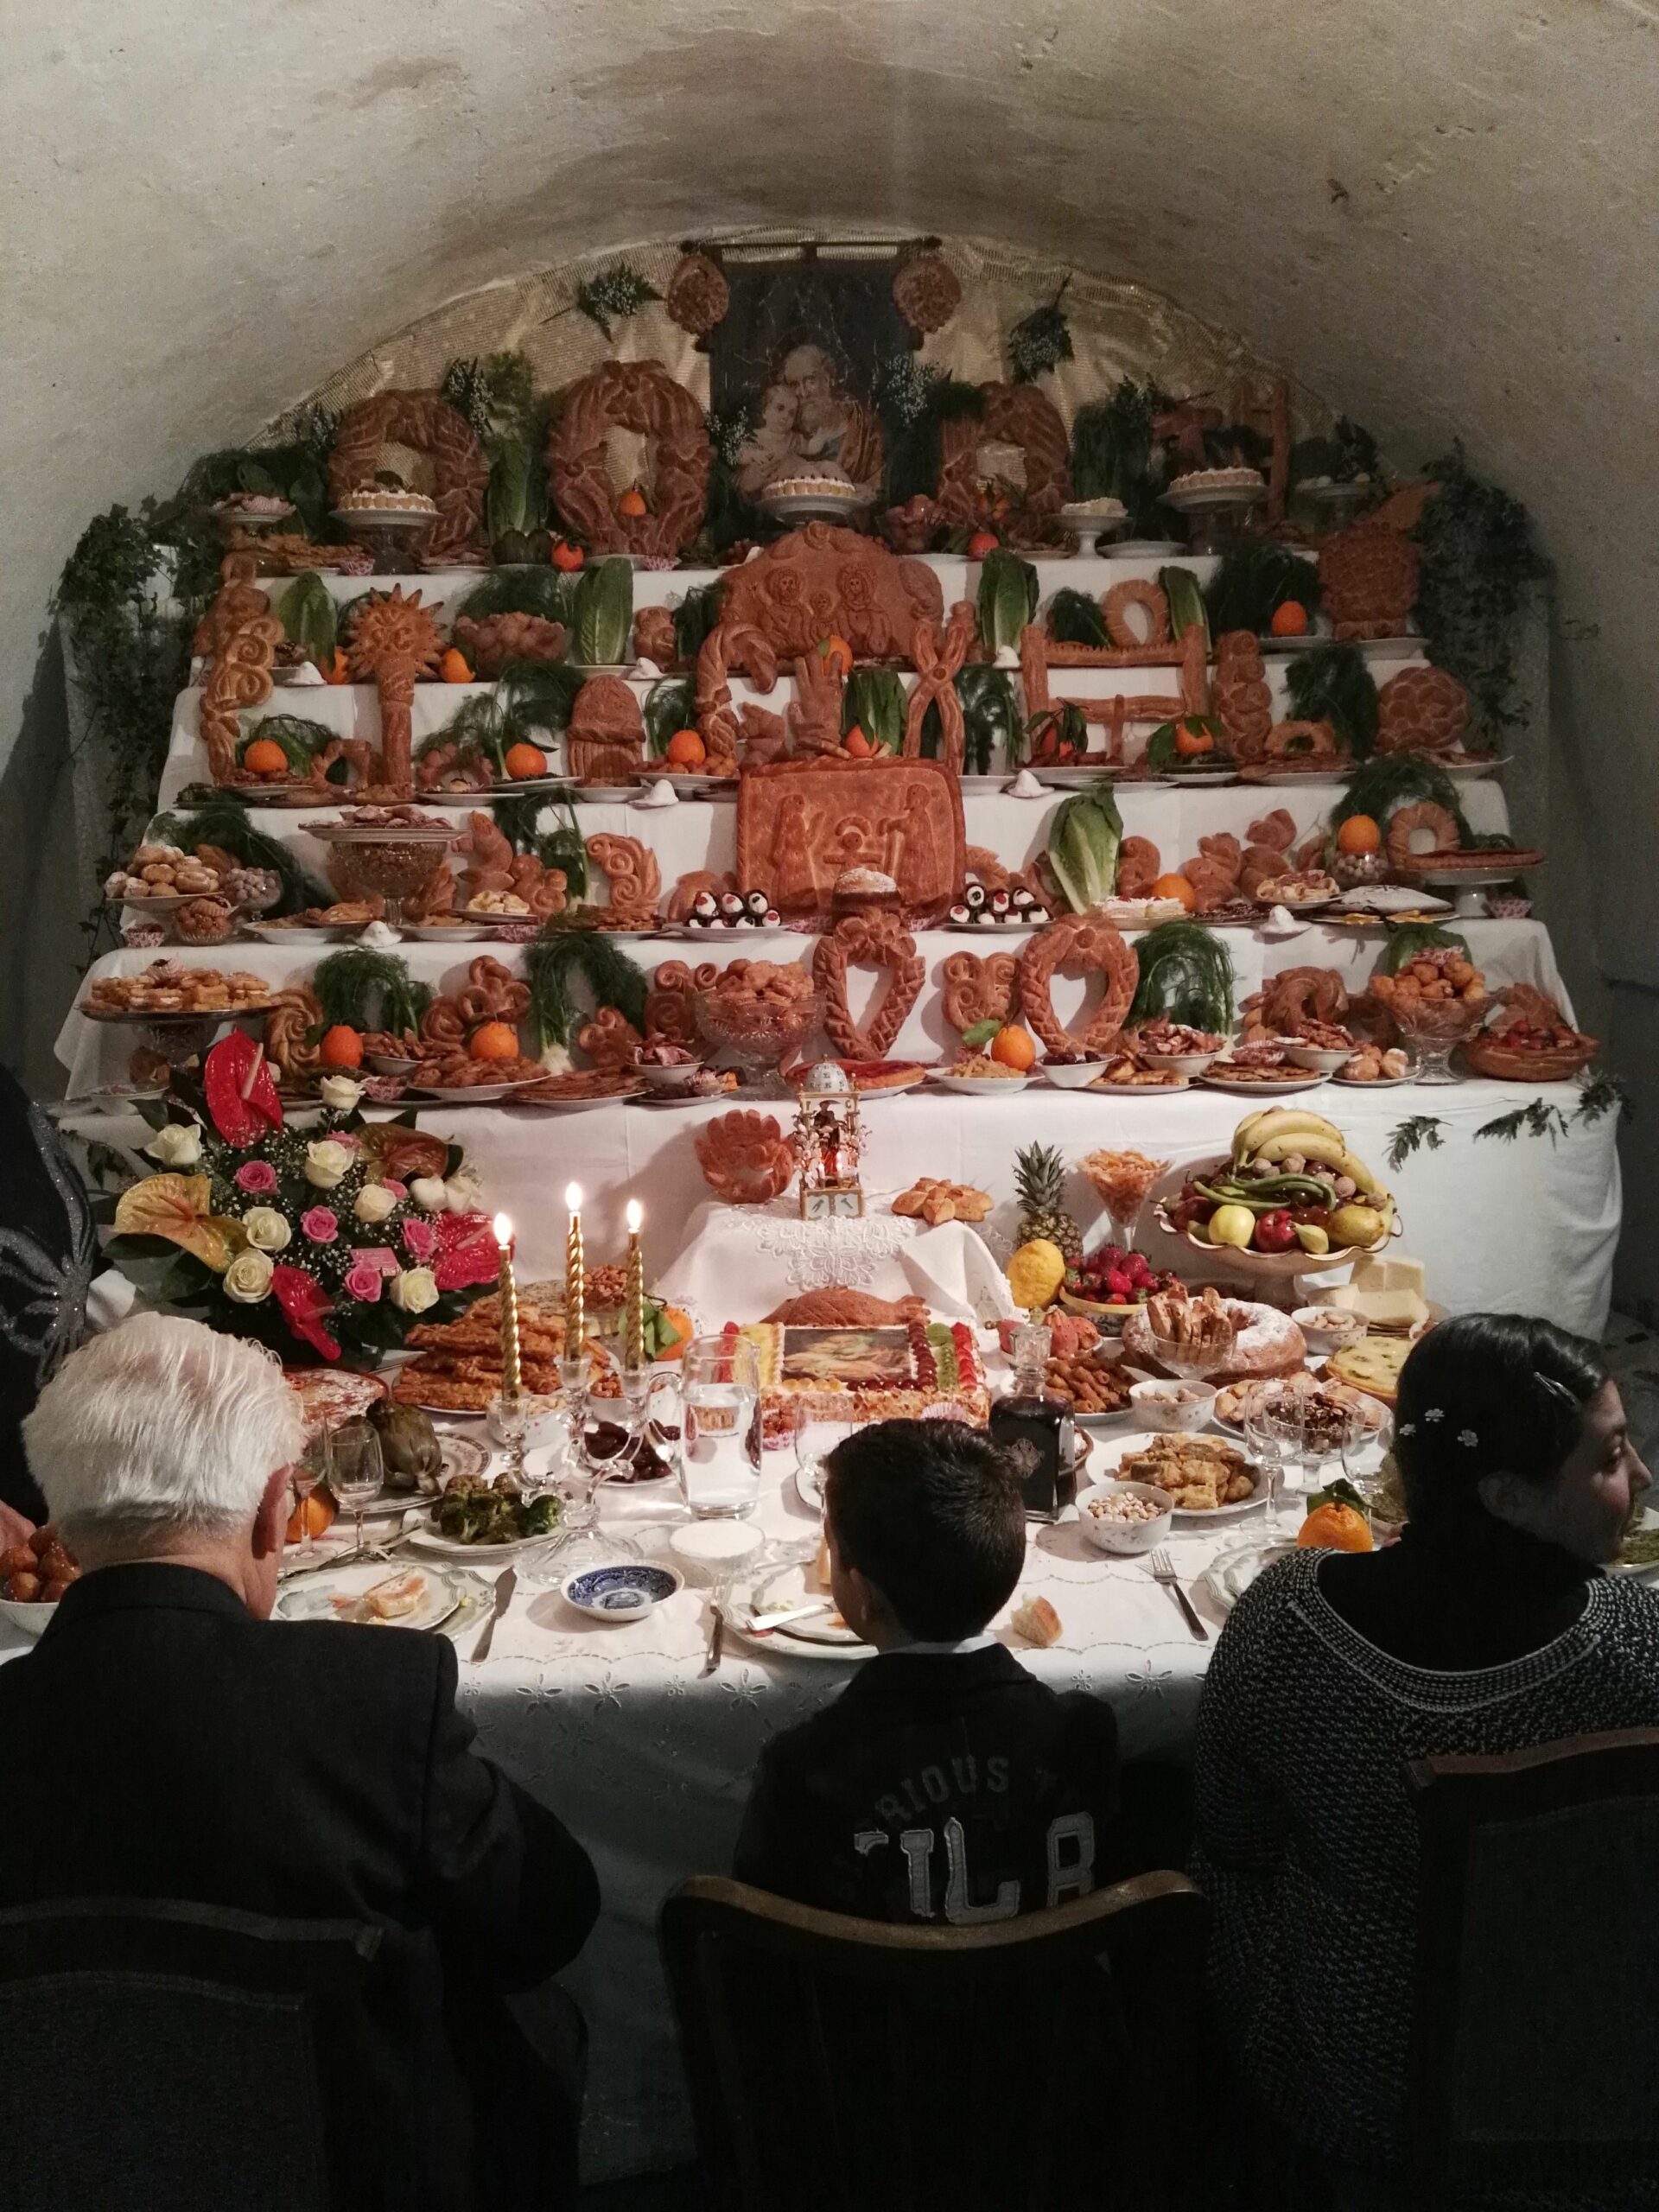 Inside a white curved room is an altar with five layers of shelving, each layer is stacked with objects fashioned out of bread (animals, housing, etc.) Interspersed between these bread objects are fruits and vegetables. Candles are lit, three individuals sit at a dining table facing the alter, an elderly man on the left, a small child in the middle, and another, older child whose head is turned to someone off camera.